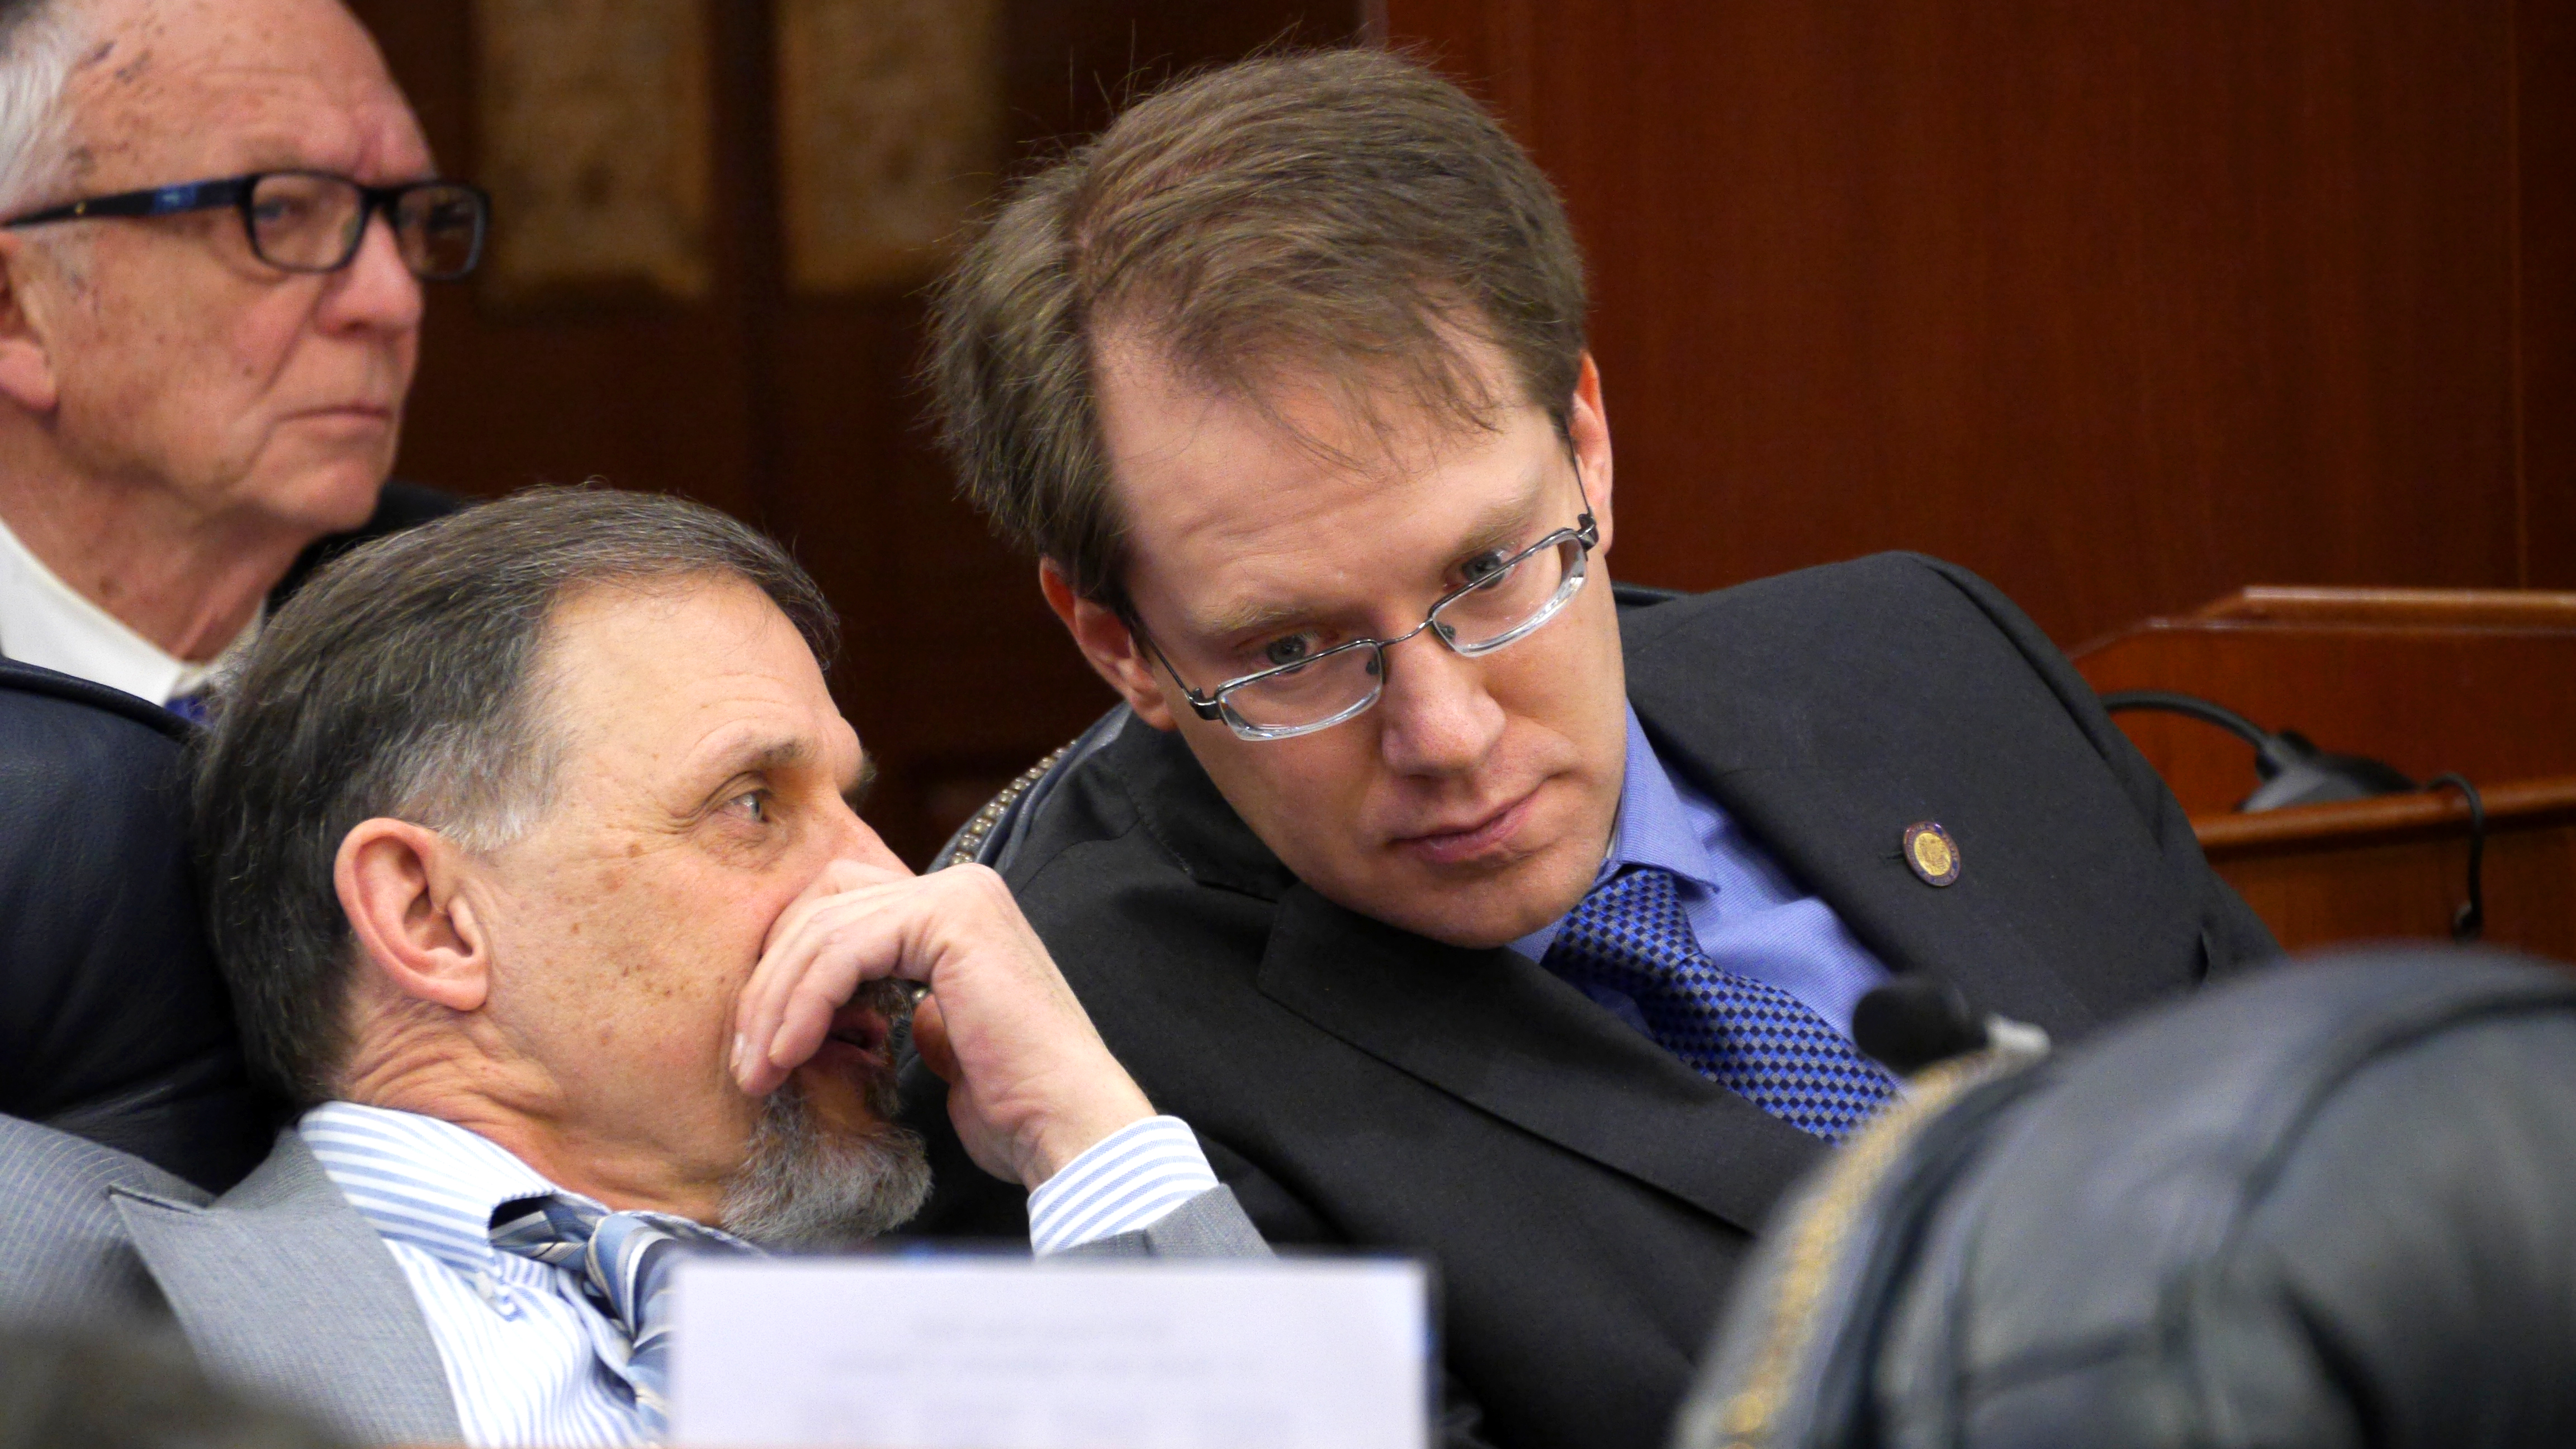 Rep. George Rauscher, R-Sutton whispers to Rep. Lance Pruitt, R-Anchorage, during a House floor session in the Capitol in Juneau on Feb. 15, 2019.